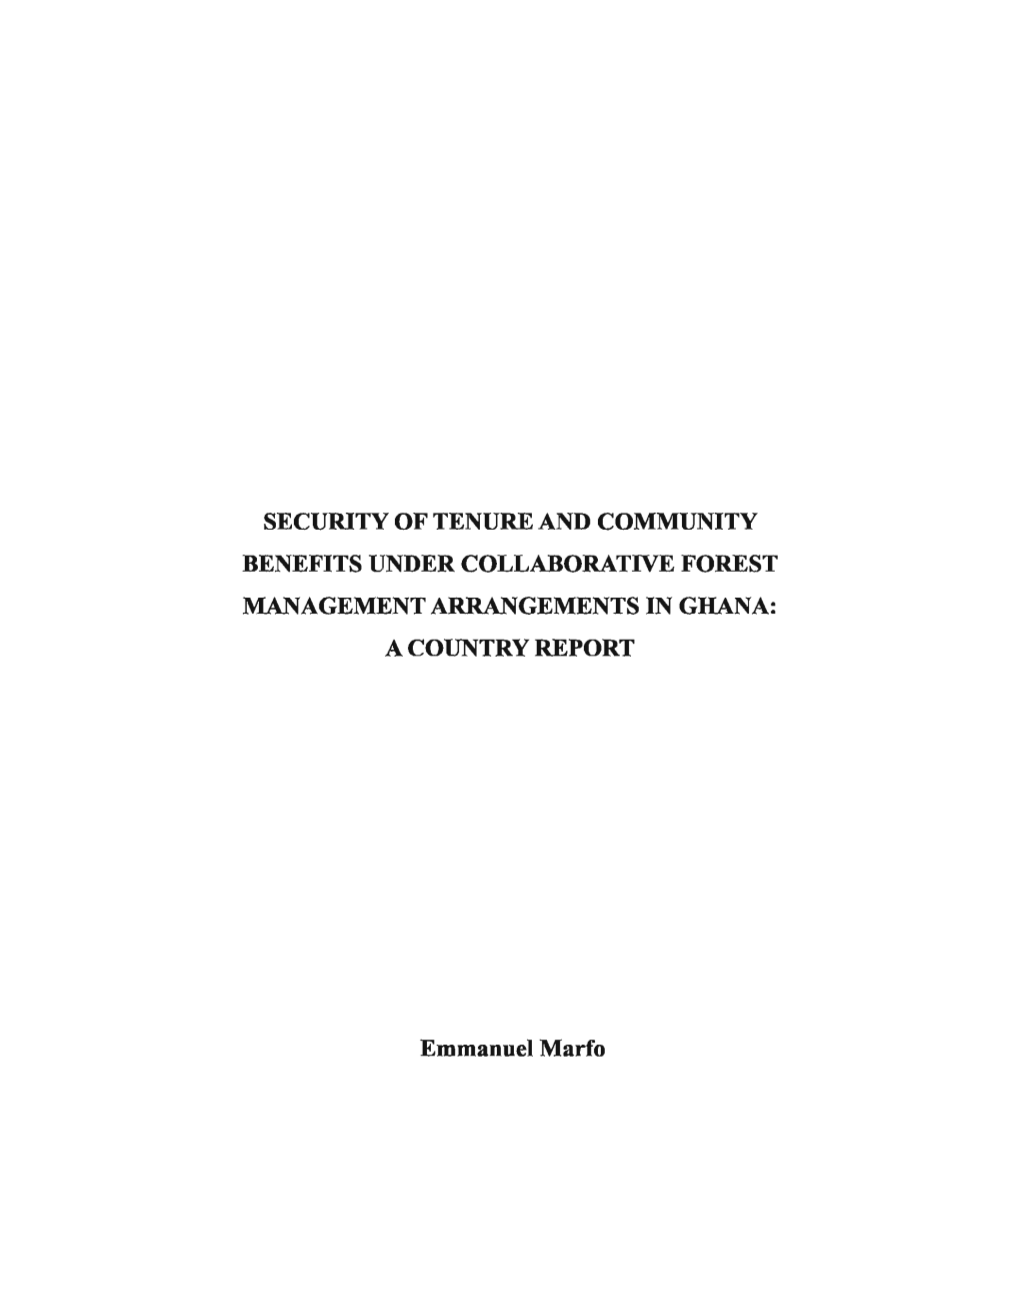 Security of Tenure and Community Benefits Under Collaborative Forest Management Arrangements in Ghana: a Country Report